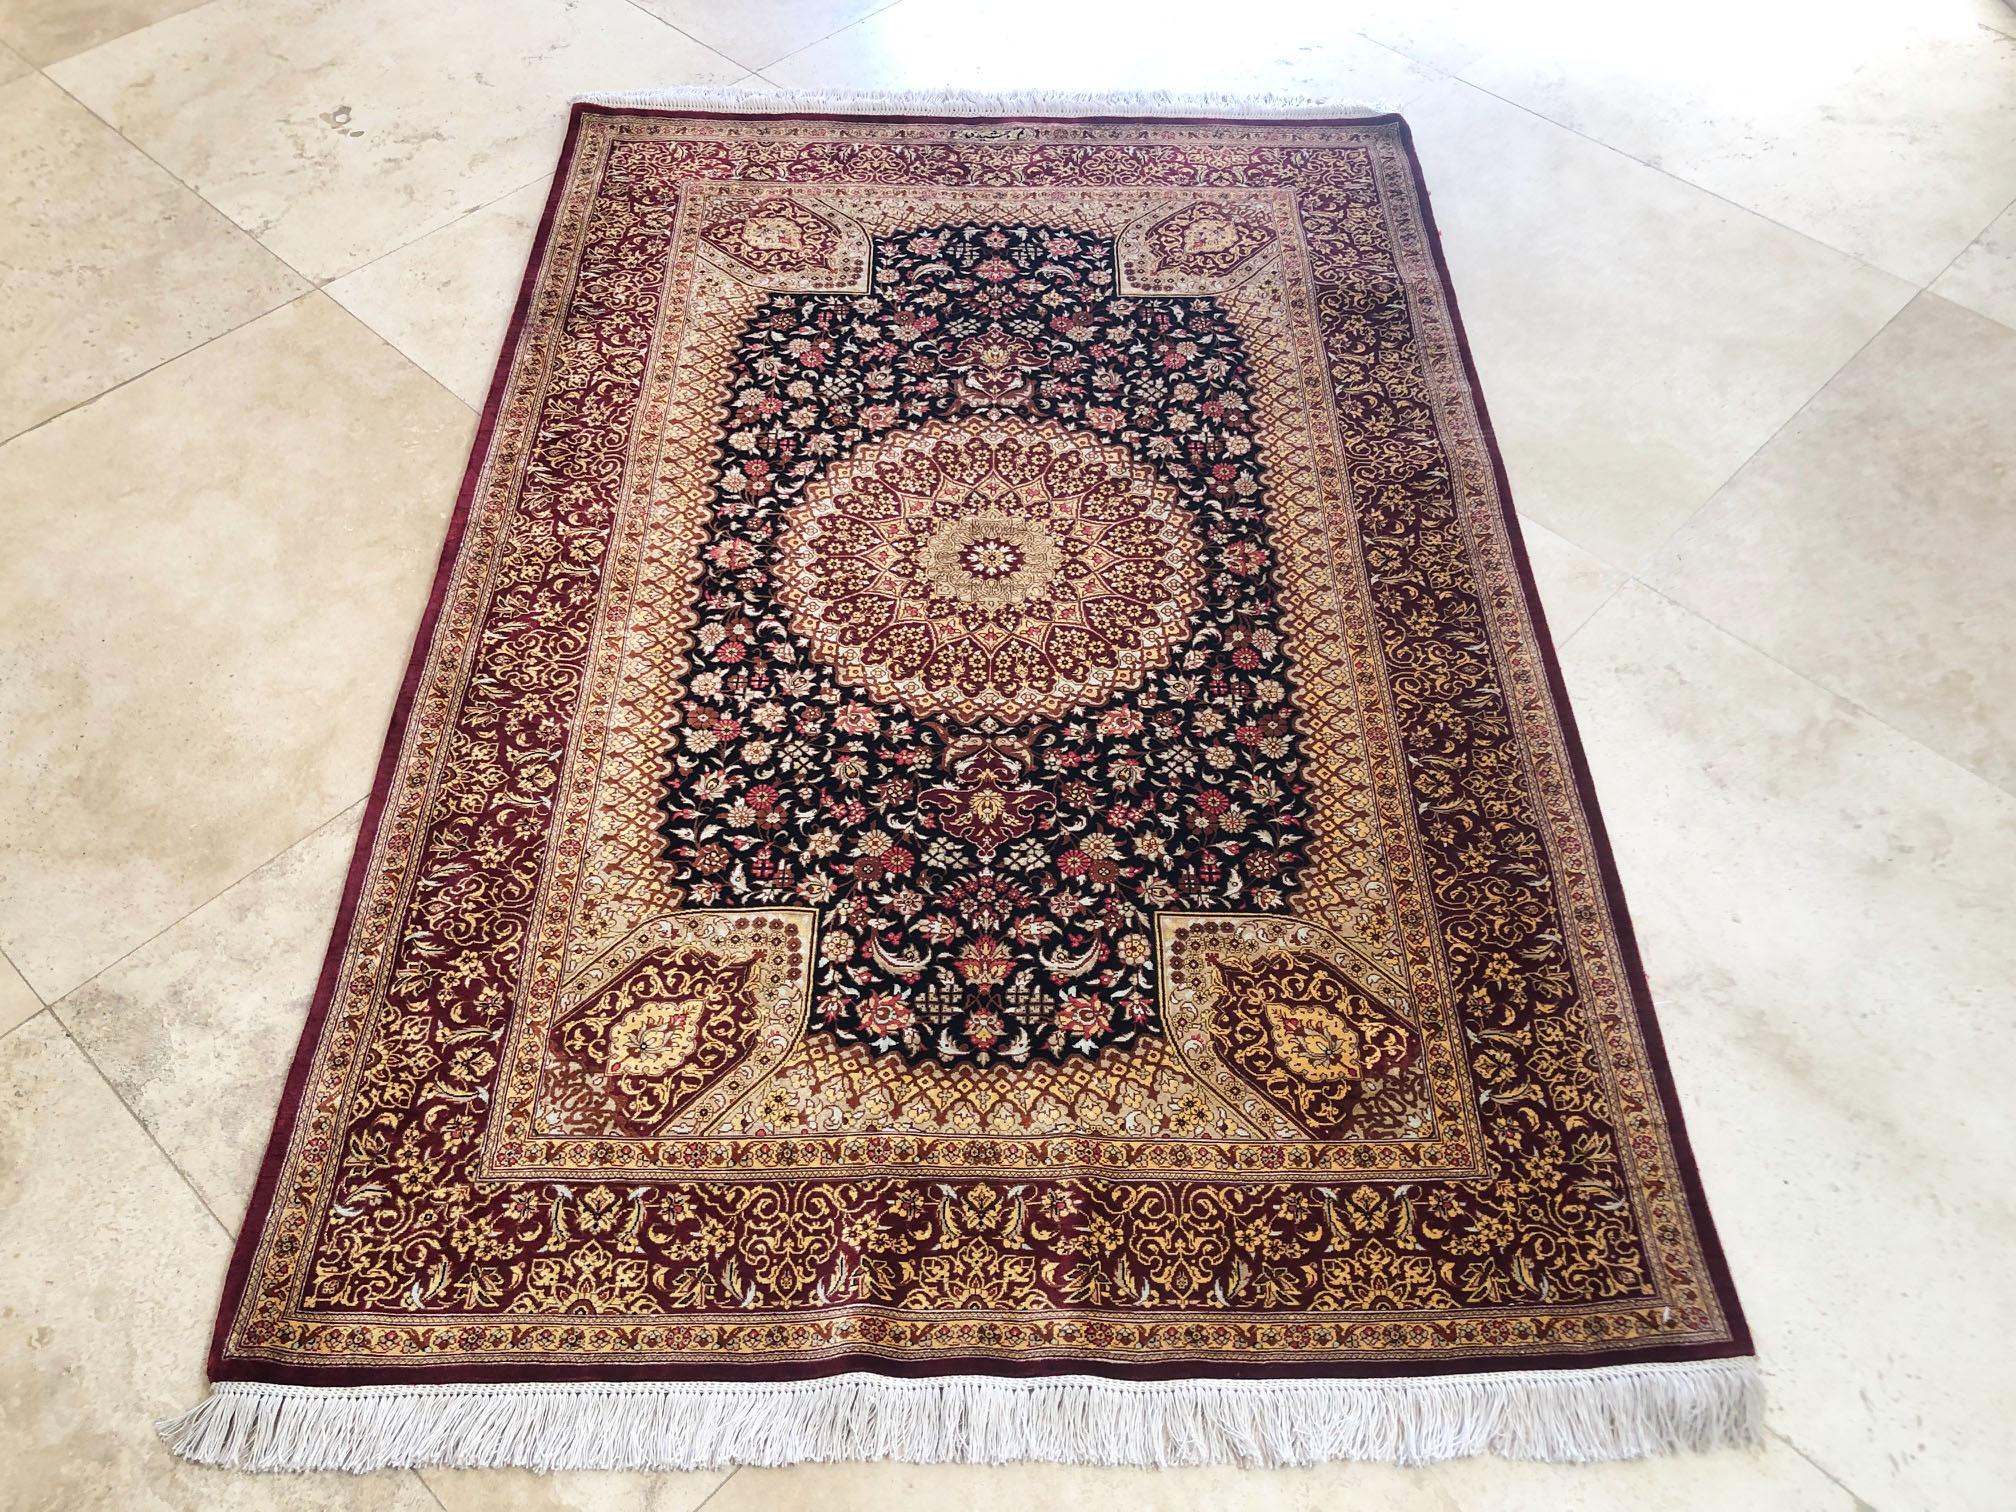 This authentic rug is from Qum, Iran which has been a rug weaving center in the past 100 years with high quality and expensive handmade rug. This stunning piece has silk pile and silk foundation. The color combination in this rug is absolutely